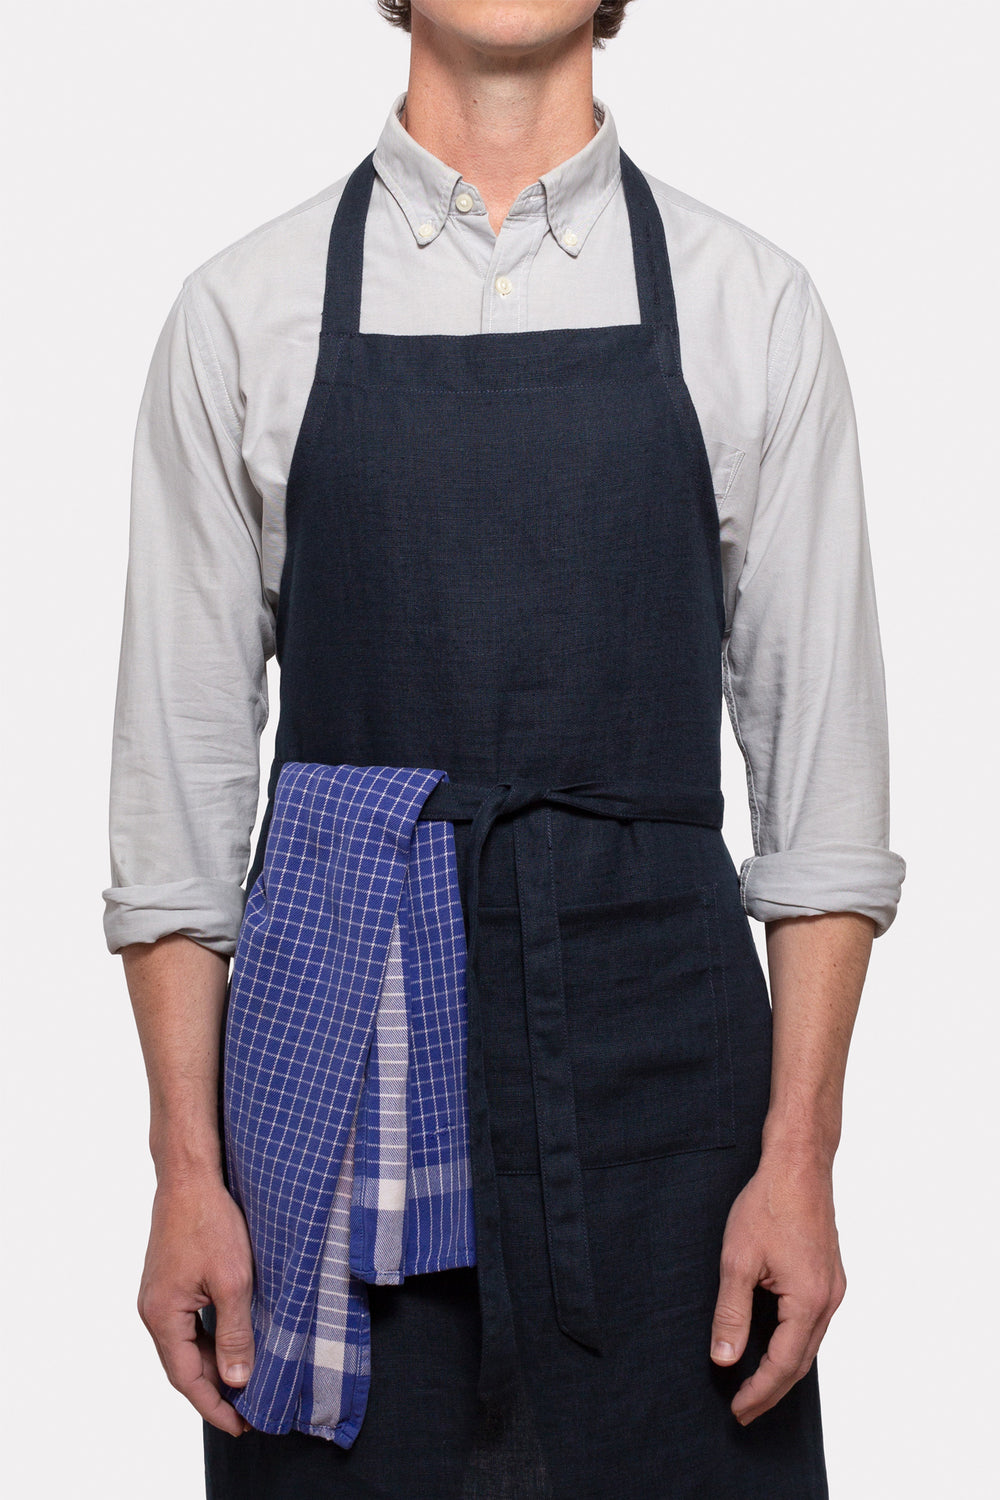 Egg Gathering and Collecting Apron Kitchen Egg Apron for Men and Women  -Pretty arts products co.,ltd